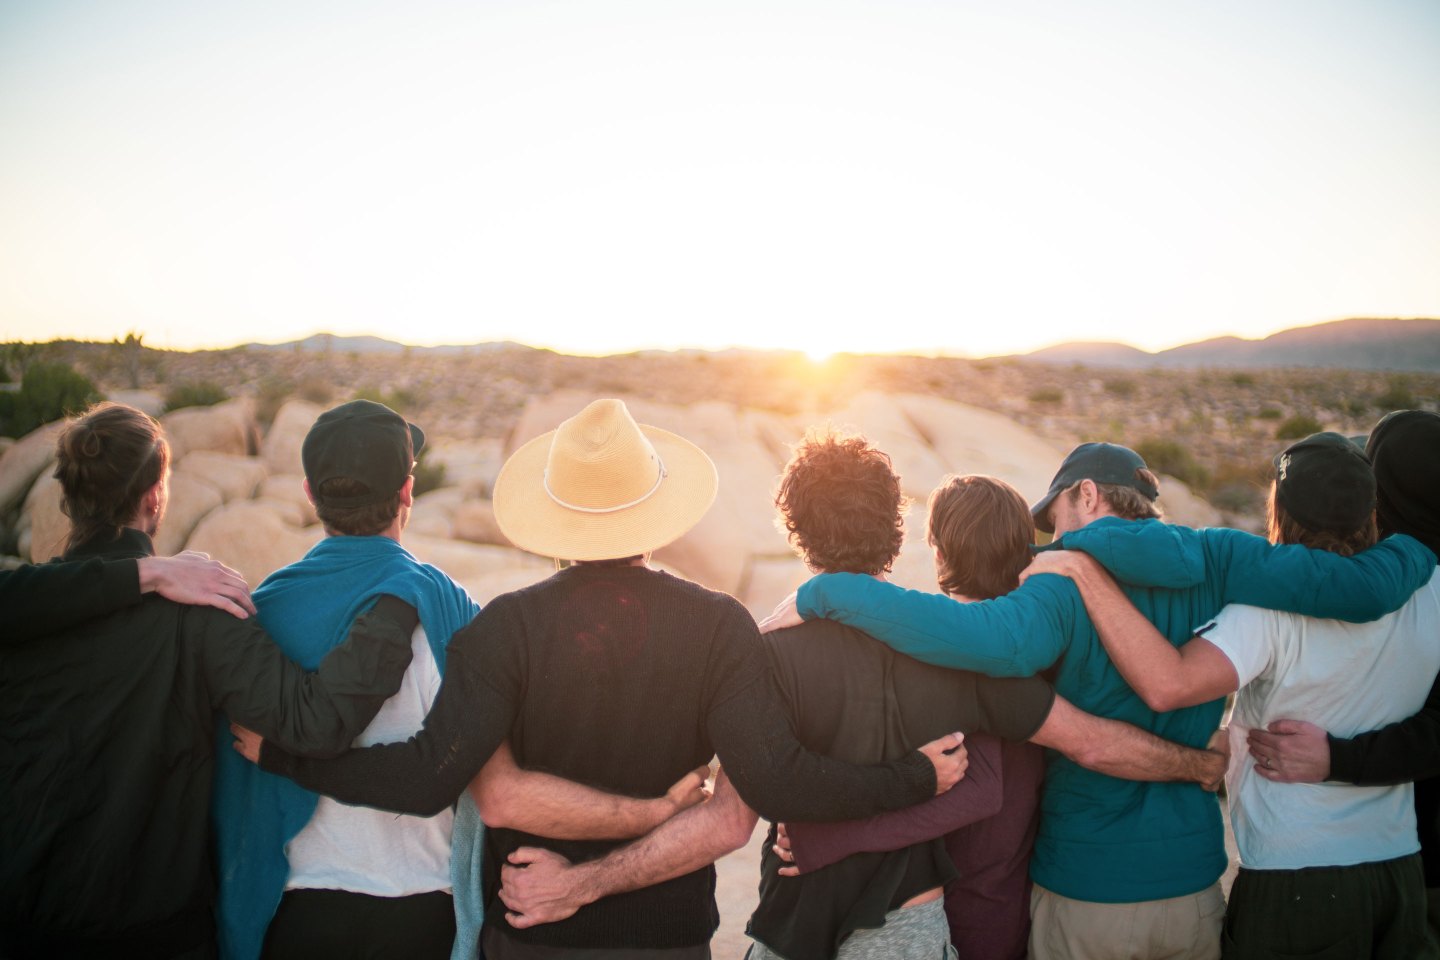 Amid the loneliness epidemic, men are craving connection. On the last sunset of an all men&#8217;s retreat in Joshua Tree, the group reflected on what it was like to build empathy.